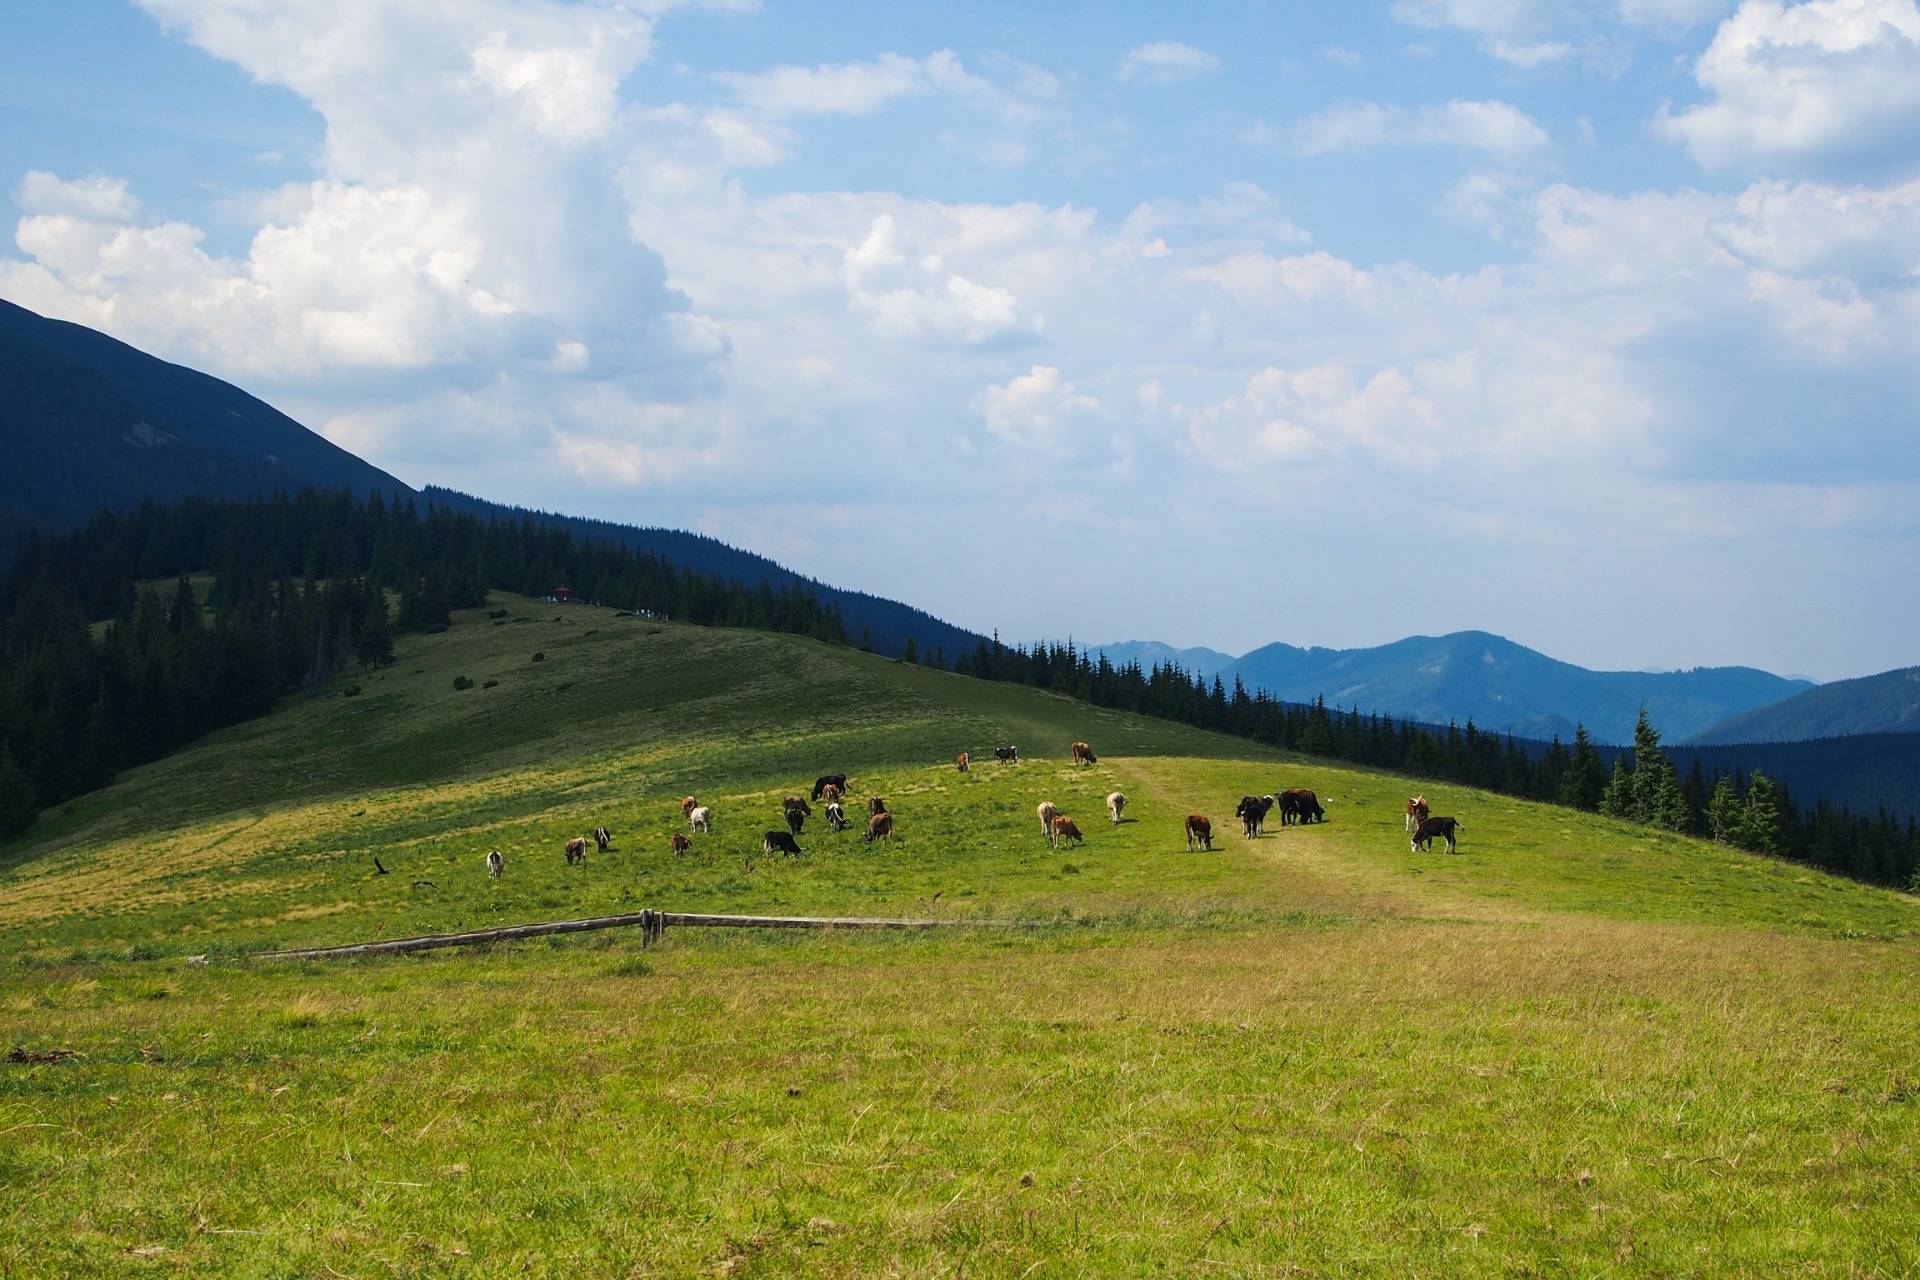 A herd of cows grazes in the meadow